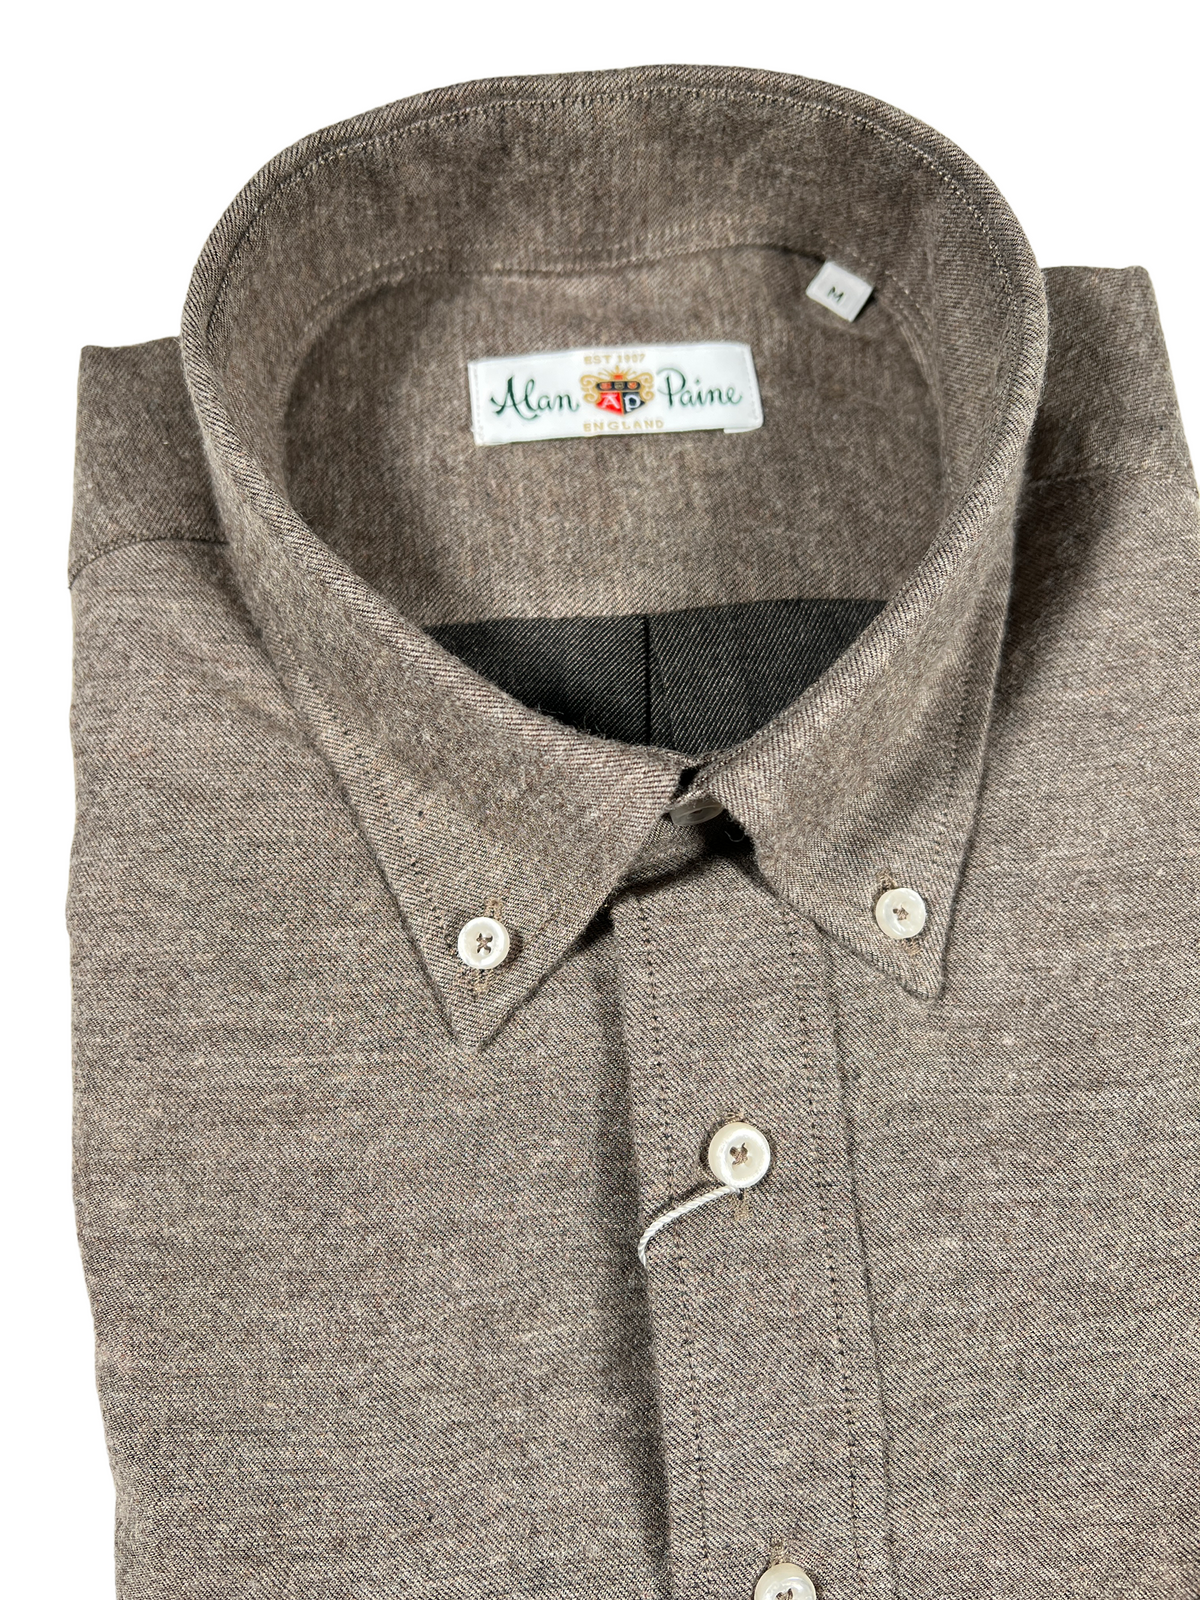 ALAN PAINE LS CLASSIC FIT SHIRT - SOLID TAUPE